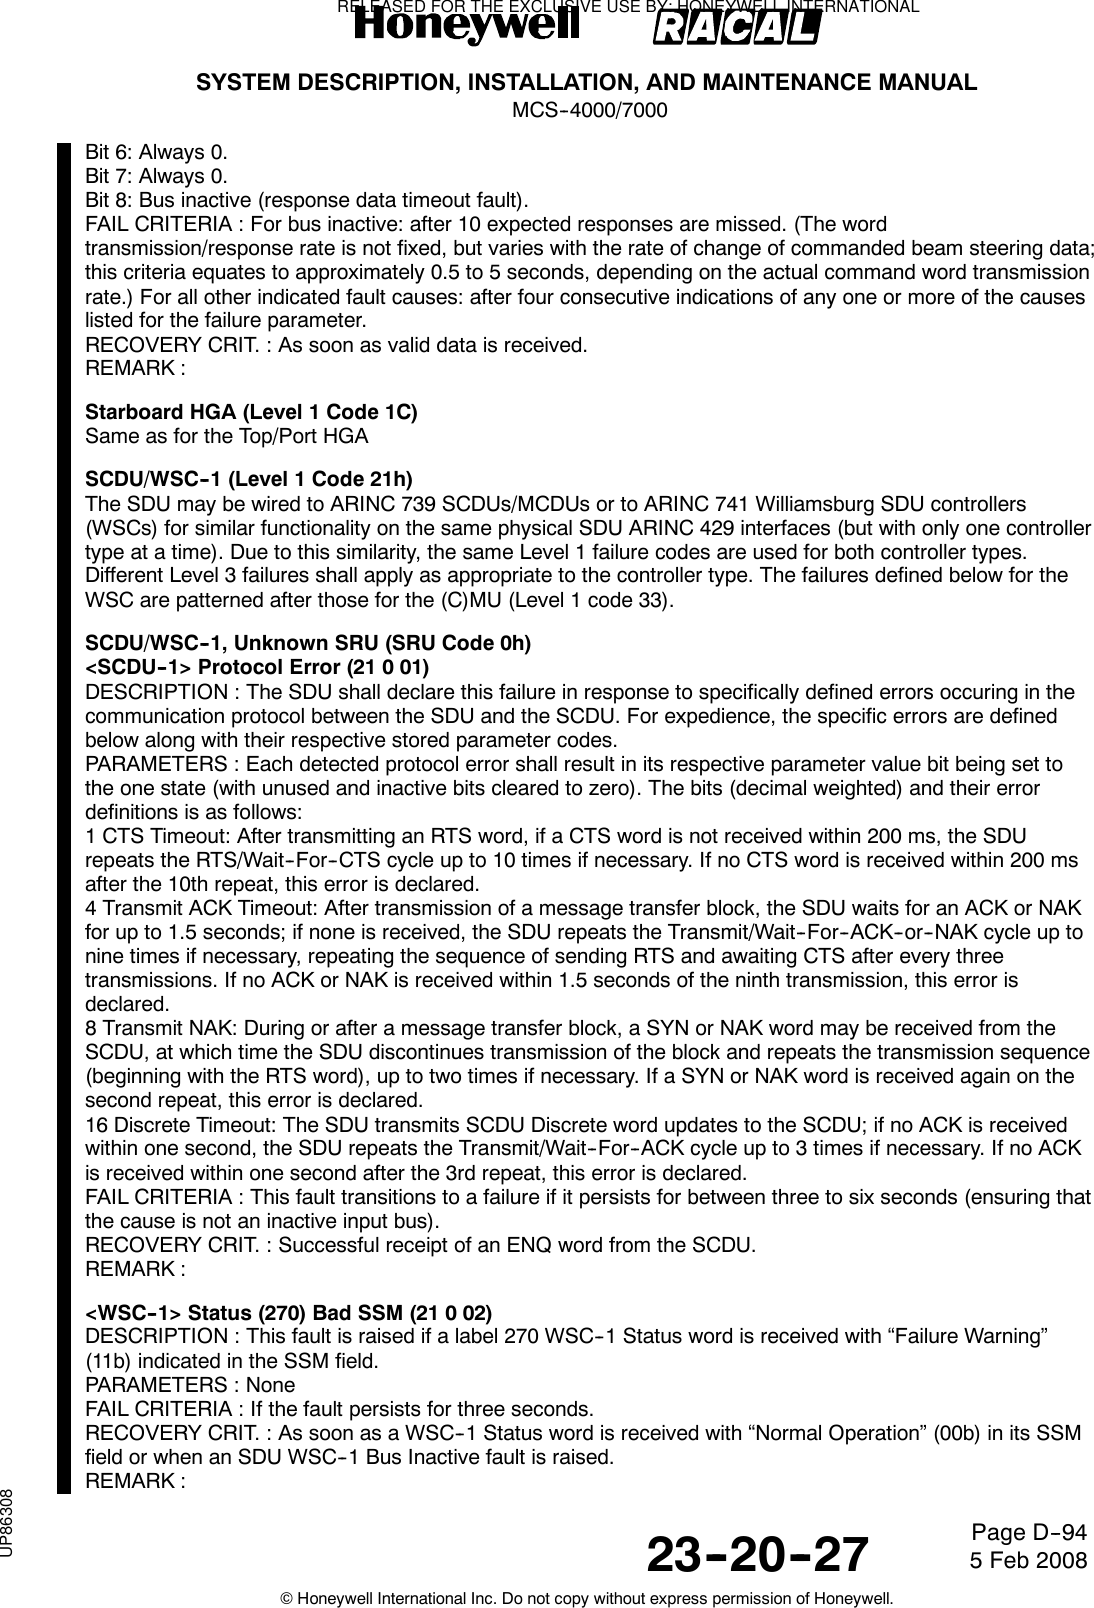 SYSTEM DESCRIPTION, INSTALLATION, AND MAINTENANCE MANUALMCS--4000/700023--20--27 5 Feb 2008©Honeywell International Inc. Do not copy without express permission of Honeywell.Page D--94Bit6:Always0.Bit7:Always0.Bit 8: Bus inactive (response data timeout fault).FAIL CRITERIA : For bus inactive: after 10 expected responses are missed. (The wordtransmission/response rate is not fixed, but varies with the rate of change of commanded beam steering data;this criteria equates to approximately 0.5 to 5 seconds, depending on the actual command word transmissionrate.) For all other indicated fault causes: after four consecutive indications of any one or more of the causeslisted for the failure parameter.RECOVERY CRIT. : As soon as valid data is received.REMARK :Starboard HGA (Level 1 Code 1C)Same as for the Top/Port HGASCDU/WSC--1 (Level 1 Code 21h)The SDU may be wired to ARINC 739 SCDUs/MCDUs or to ARINC 741 Williamsburg SDU controllers(WSCs) for similar functionality on the same physical SDU ARINC 429 interfaces (but with only one controllertype at a time). Due to this similarity, the same Level 1 failure codes are used for both controller types.Different Level 3 failures shall apply as appropriate to the controller type. The failures defined below for theWSC are patterned after those for the (C)MU (Level 1 code 33).SCDU/WSC--1, Unknown SRU (SRU Code 0h)&lt;SCDU--1&gt; Protocol Error (21 0 01)DESCRIPTION : The SDU shall declare this failure in response to specifically defined errors occuring in thecommunication protocol between the SDU and the SCDU. For expedience, the specific errors are definedbelow along with their respective stored parameter codes.PARAMETERS : Each detected protocol error shall result in its respective parameter value bit being set tothe one state (with unused and inactive bits cleared to zero). The bits (decimal weighted) and their errordefinitions is as follows:1 CTS Timeout: After transmitting an RTS word, if a CTS word is not received within 200 ms, the SDUrepeats the RTS/Wait--For--CTS cycle up to 10 times if necessary. If no CTS word is received within 200 msafter the 10th repeat, this error is declared.4 Transmit ACK Timeout: After transmission of a message transfer block, the SDU waits for an ACK or NAKfor up to 1.5 seconds; if none is received, the SDU repeats the Transmit/Wait--For--ACK--or--NAK cycle up tonine times if necessary, repeating the sequence of sending RTS and awaiting CTS after every threetransmissions. If no ACK or NAK is received within 1.5 seconds of the ninth transmission, this error isdeclared.8 Transmit NAK: During or after a message transfer block, a SYN or NAK word may be received from theSCDU, at which time the SDU discontinues transmission of the block and repeats the transmission sequence(beginning with the RTS word), up to two times if necessary. If a SYN or NAK word is received again on thesecond repeat, this error is declared.16 Discrete Timeout: The SDU transmits SCDU Discrete word updates to the SCDU; if no ACK is receivedwithin one second, the SDU repeats the Transmit/Wait--For--ACK cycle up to 3 times if necessary. If no ACKis received within one second after the 3rd repeat, this error is declared.FAIL CRITERIA : This fault transitions to a failure if it persists for between three to six seconds (ensuring thatthe cause is not an inactive input bus).RECOVERY CRIT. : Successful receipt of an ENQ word from the SCDU.REMARK :&lt;WSC--1&gt; Status (270) Bad SSM (21 0 02)DESCRIPTION : This fault is raised if a label 270 WSC--1 Status word is received with “Failure Warning”(11b) indicated in the SSM field.PARAMETERS : NoneFAIL CRITERIA : If the fault persists for three seconds.RECOVERY CRIT. : As soon as a WSC--1 Status word is received with “Normal Operation” (00b) in its SSMfield or when an SDU WSC--1 Bus Inactive fault is raised.REMARK :RELEASED FOR THE EXCLUSIVE USE BY: HONEYWELL INTERNATIONALUP86308